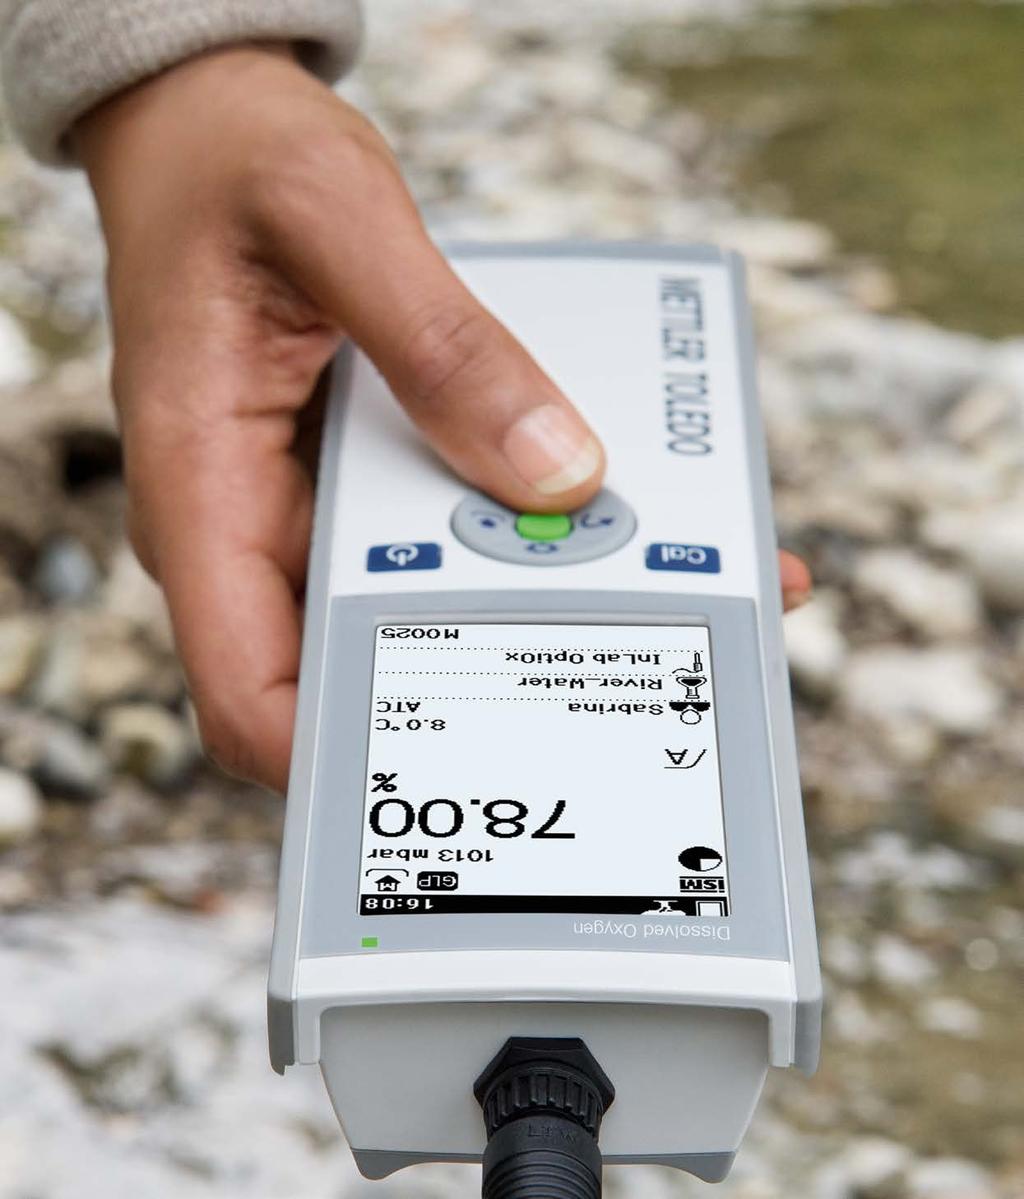 Sunlight-Proof View Data Even in Direct Sunlight With her new Seven2Go S9 dissolved oxygen (DO) meter and optical InLab OptiOx sensor, Sabrina can read the dissolved oxygen values gathered from